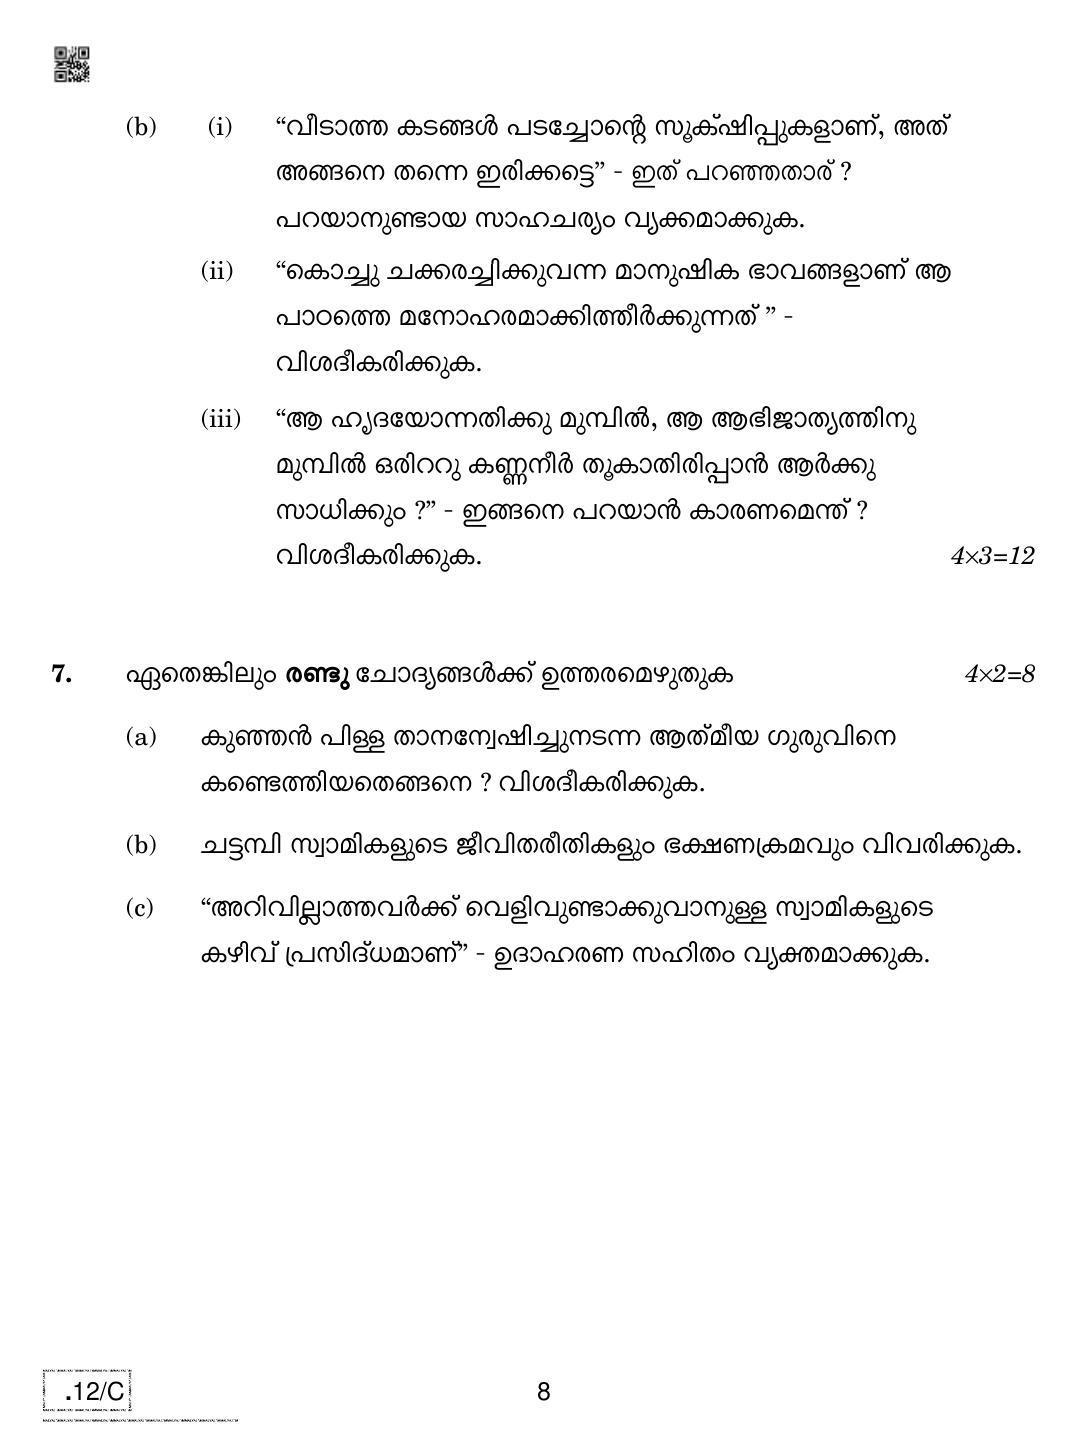 CBSE Class 10 Malayalam 2020 Compartment Question Paper - Page 8